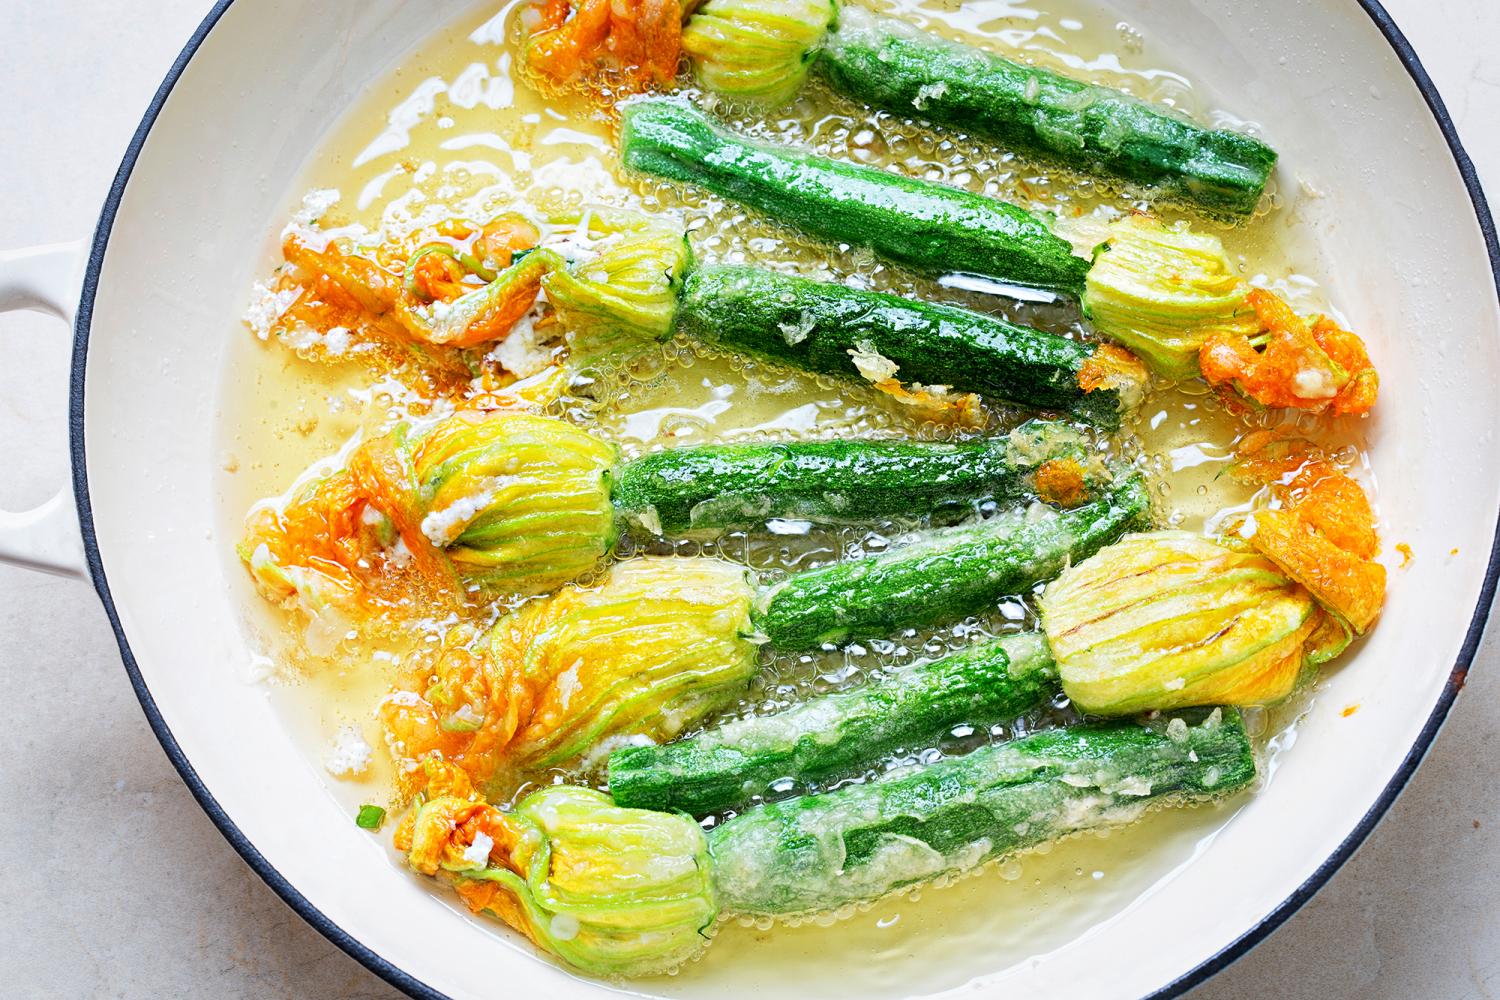 Courgette flowers oil